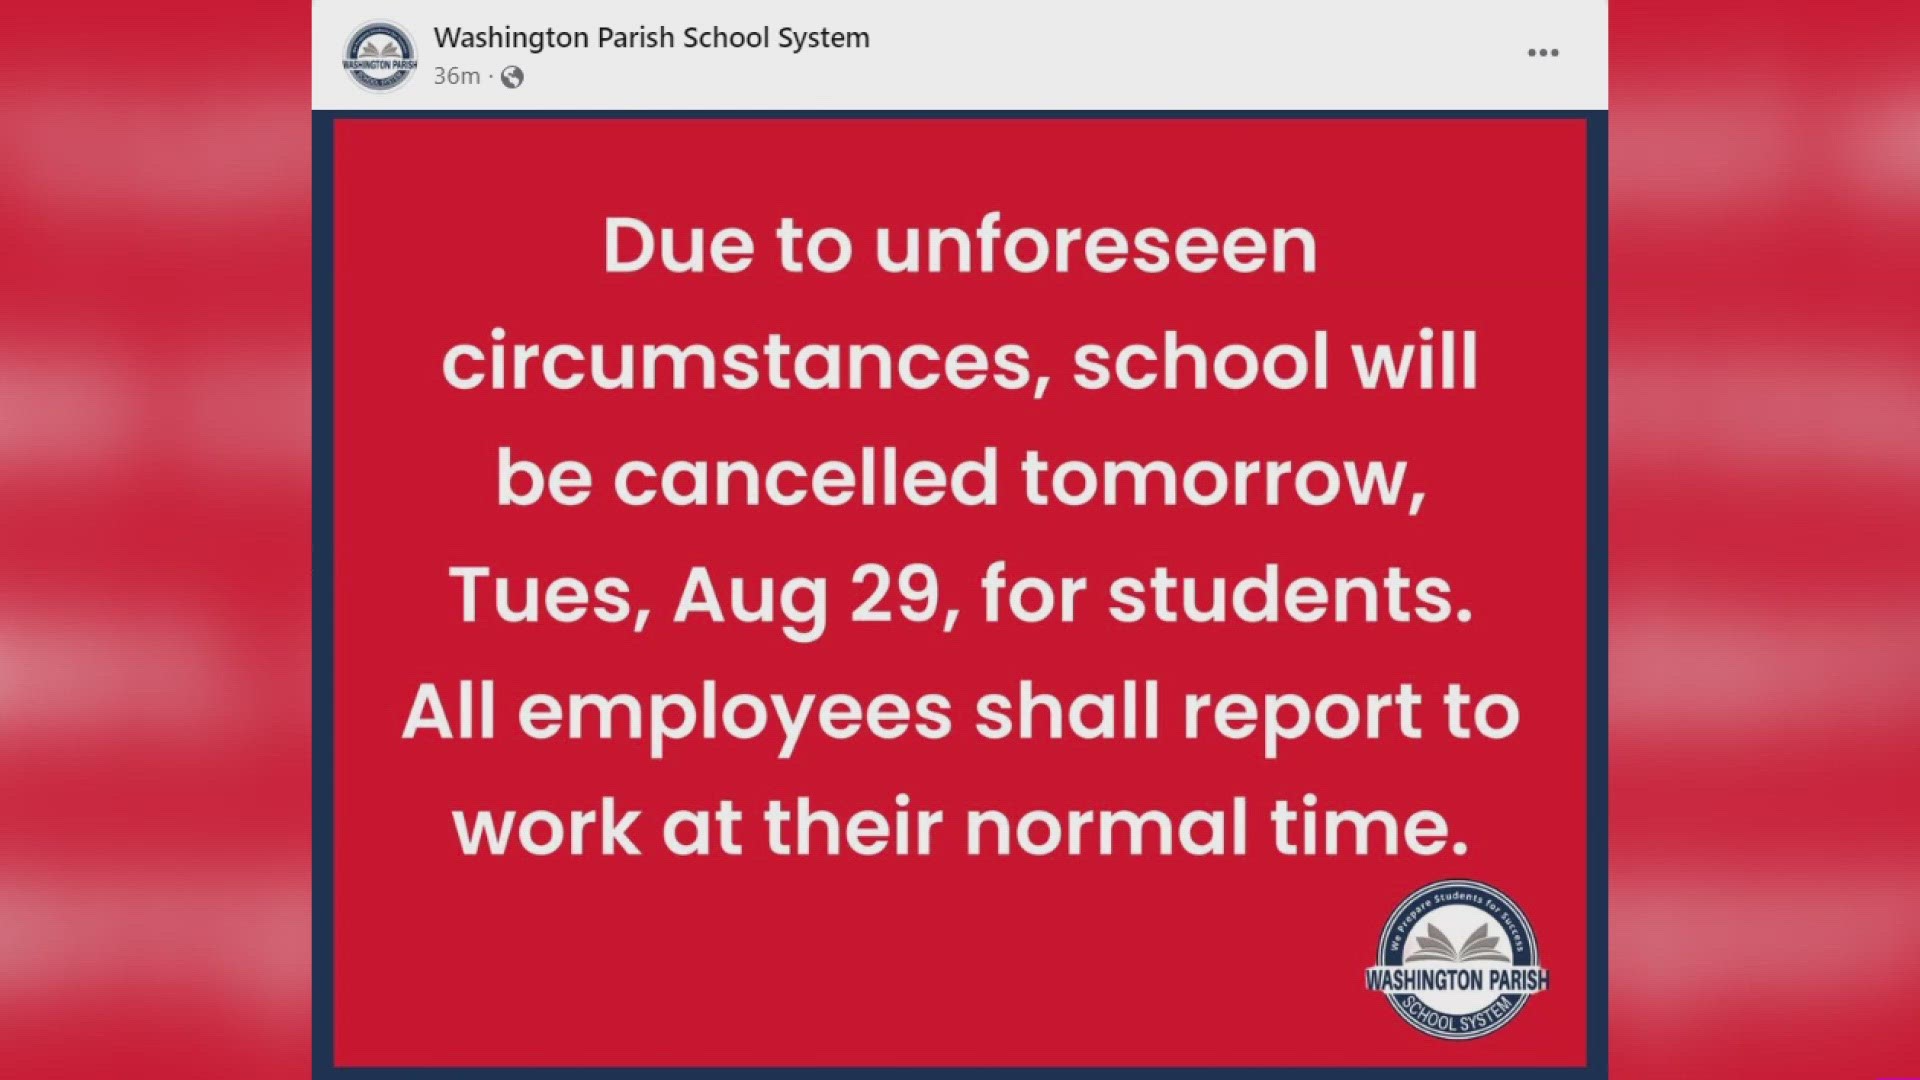 The Washington Parish School System took to social media to announce that due to unforeseen circumstances, school will be cancelled on Tuesday, Aug. 29 for students.